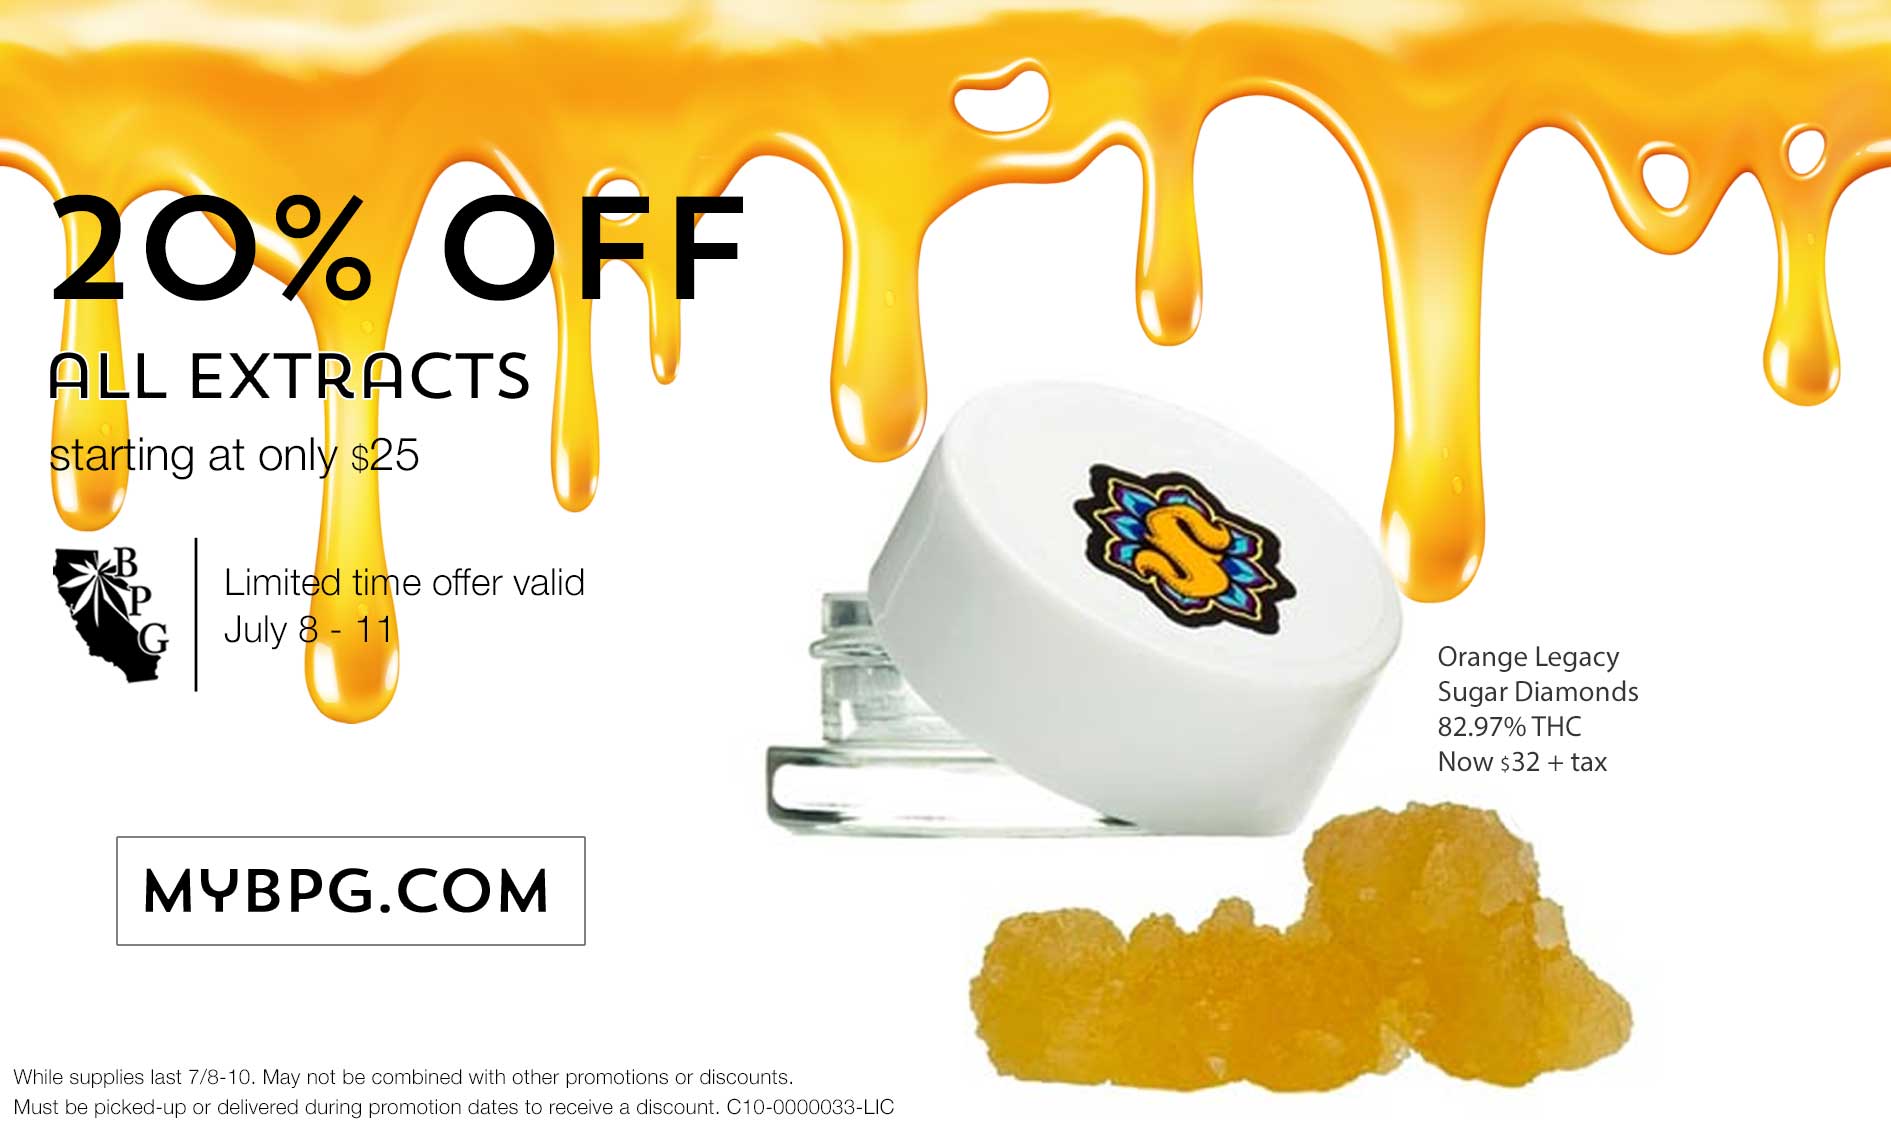 Celebrate 7/10 With 20% OFF All Extracts at Berkeley Patients Group July 8 - 10.